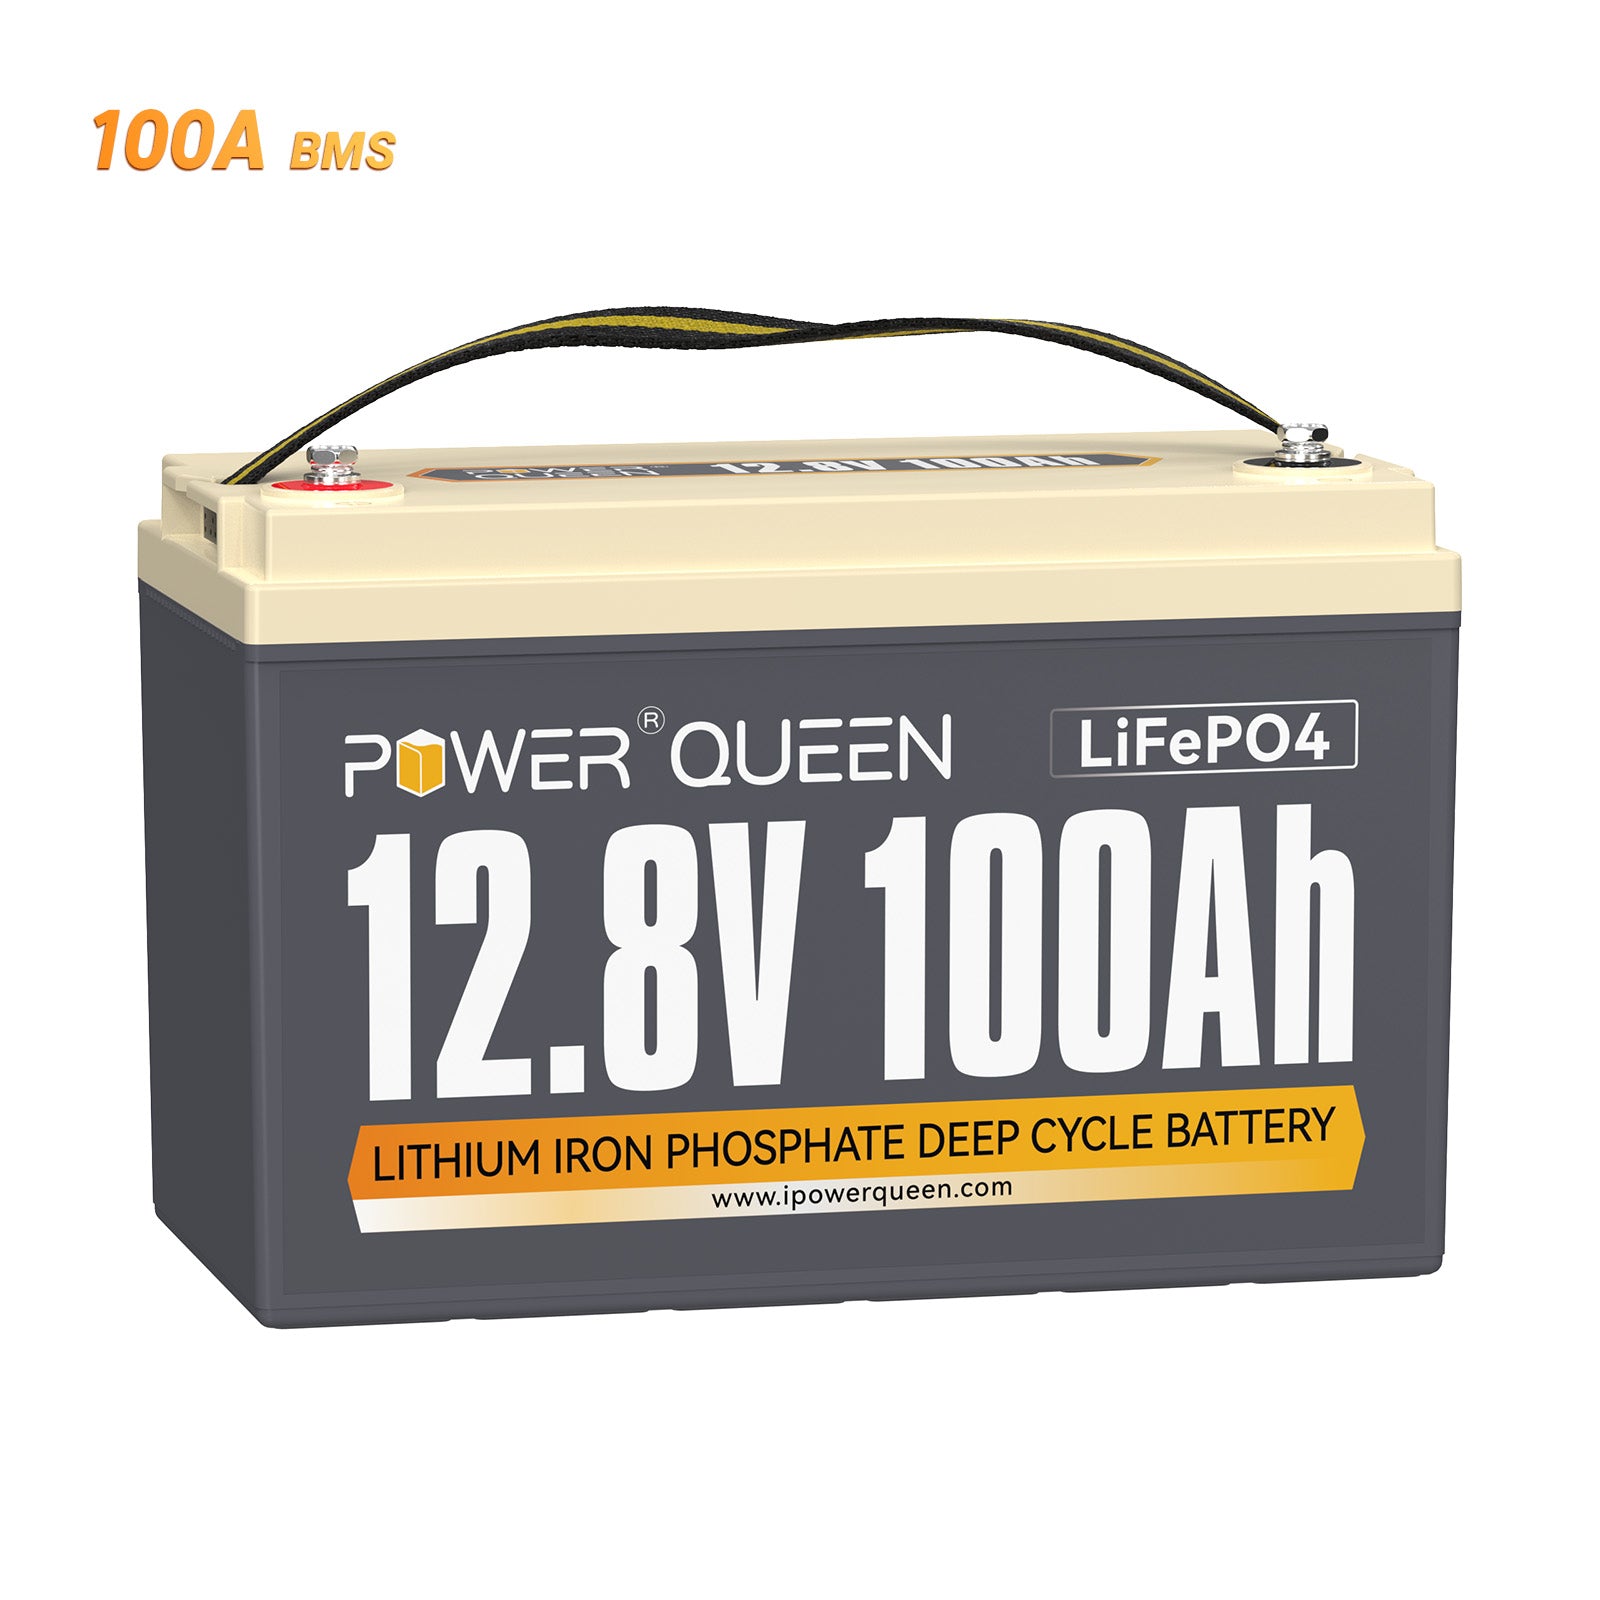 Power Queen 12.8V 100Ah LiFePO4 battery, built-in 100A BMS